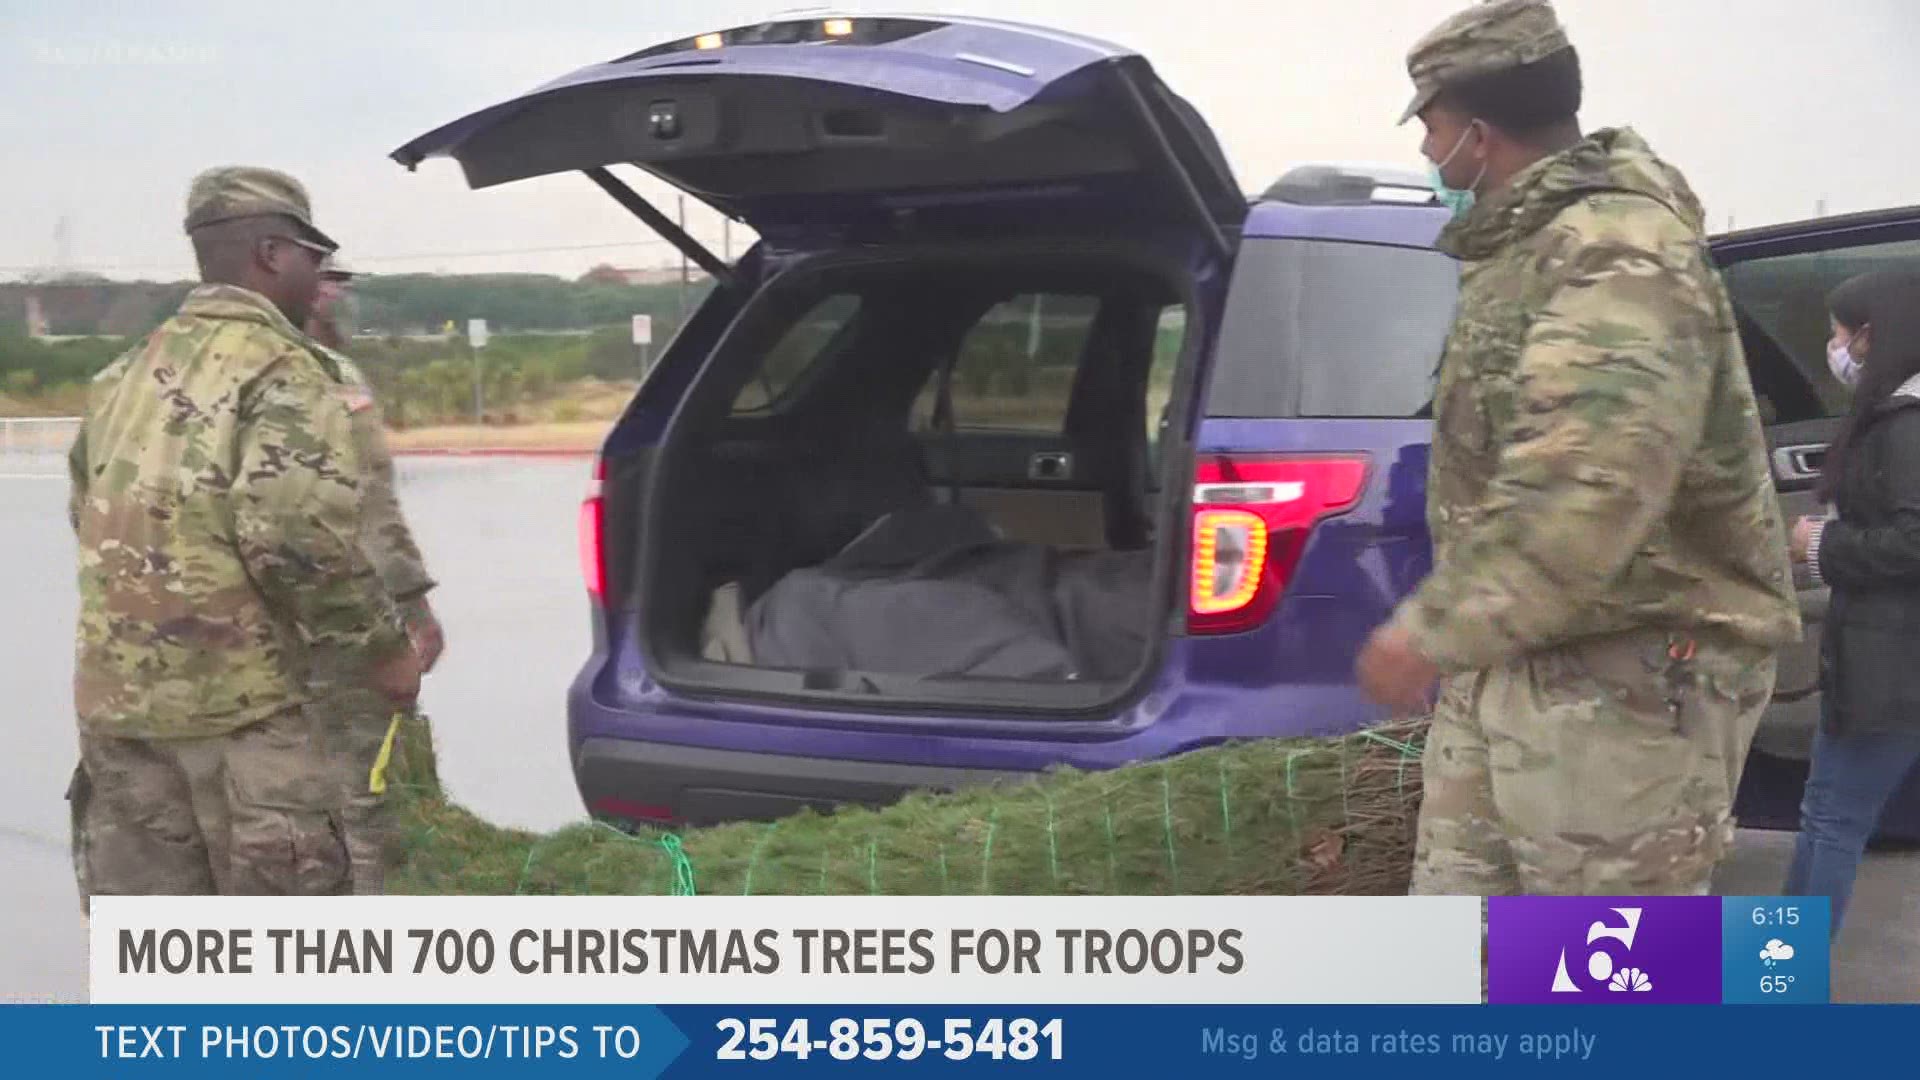 Military families got to pick out a tree to take home for free as part of the Trees For Troops program.